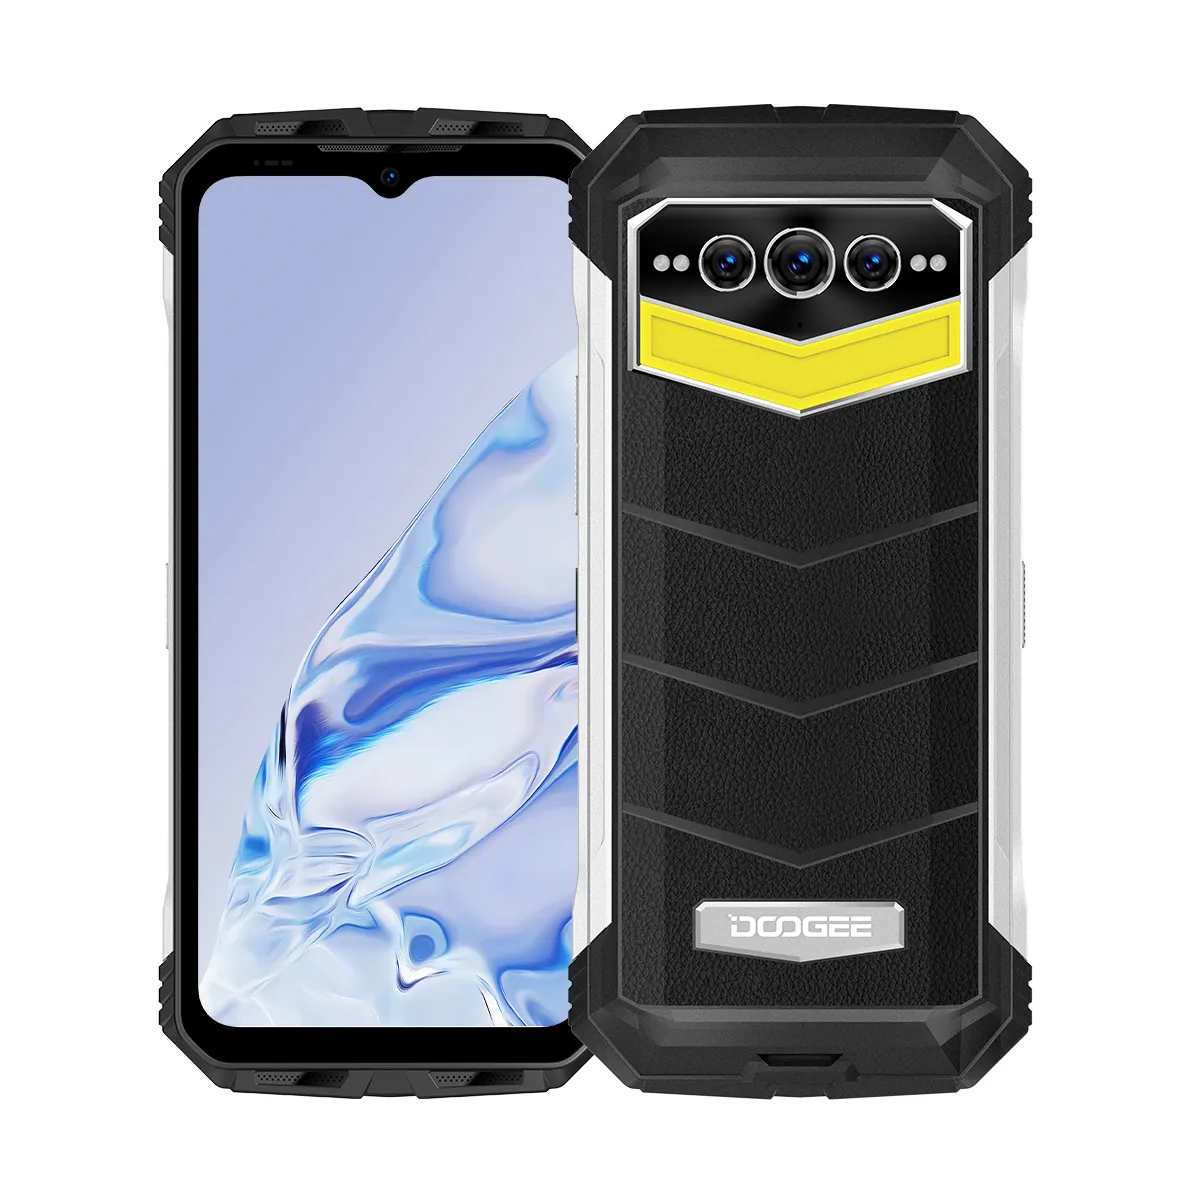 10800mAh Mobile Night Vision Camera 108MP Main 20+256GB NFC Google Pay Fingerprint Android 12 Rugged Smartphone Doogee S100 Pro